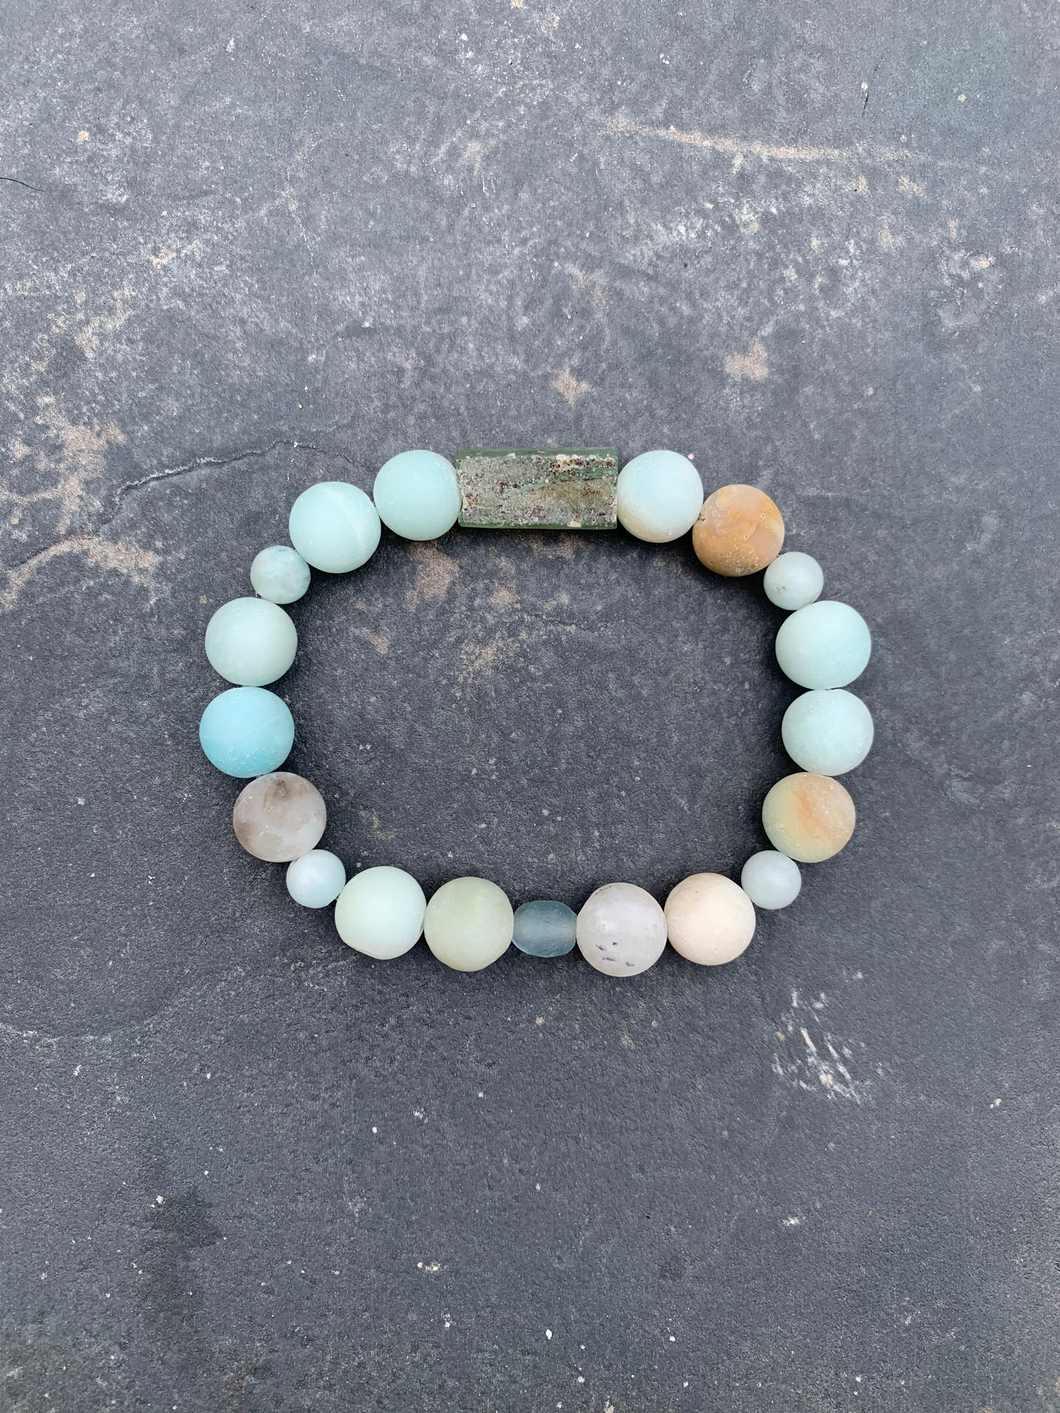 Live by Water Make Waves - Shades of Water Bracelet